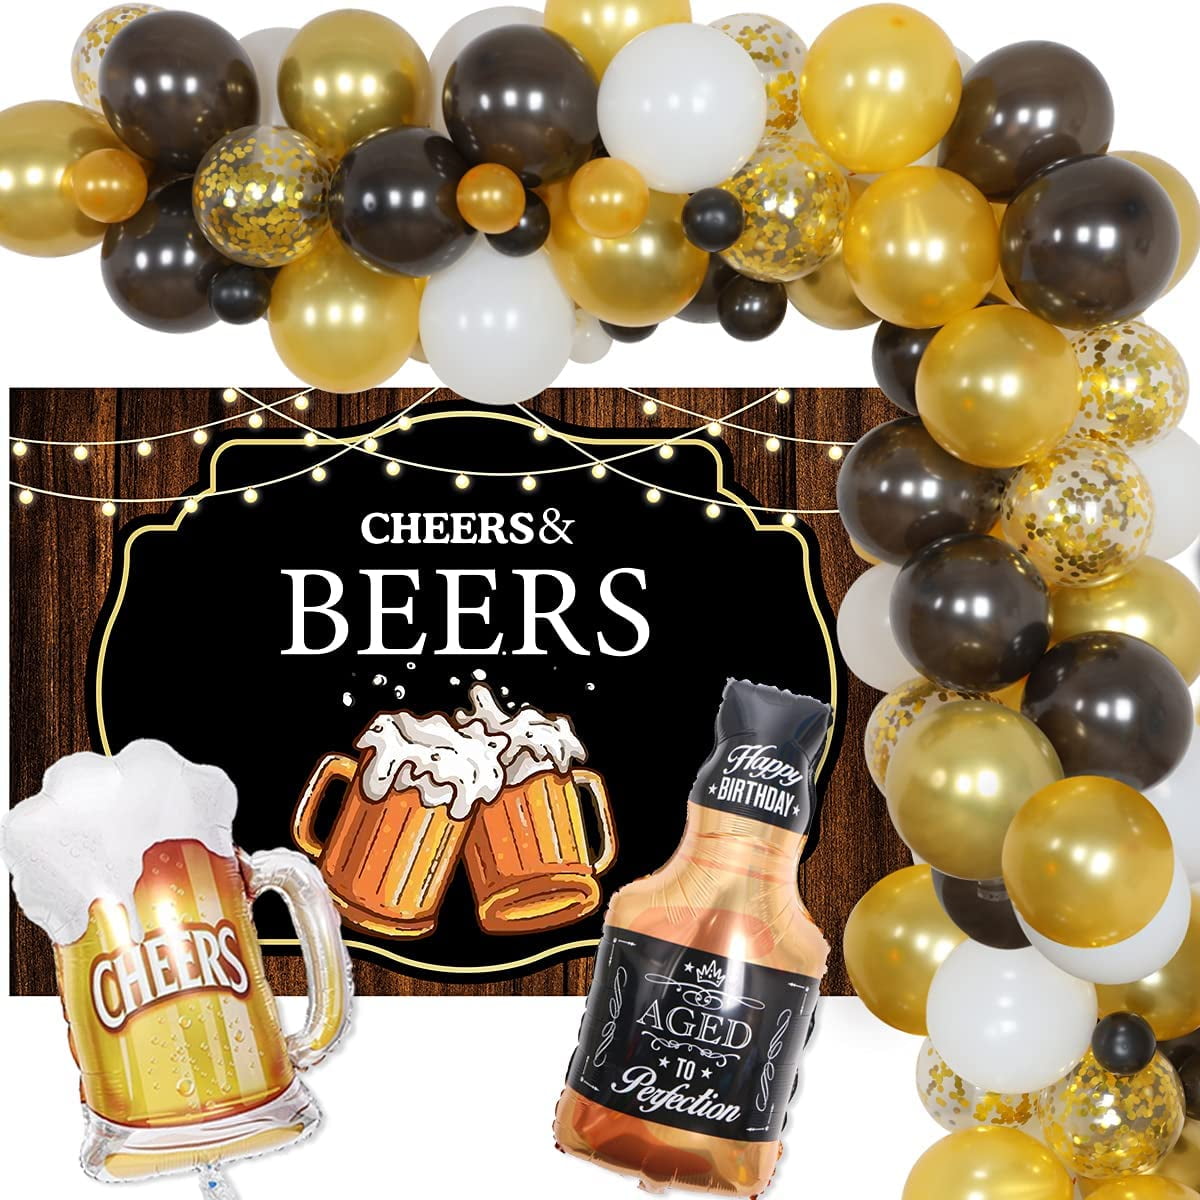 AOWEE Men Black Gold Party Decoration, Black Agate Sequins Balloon Garland  Kit with Confetti Balloons Happy Birthday Banner for Men Women 30th Birthday  Baby Shower 